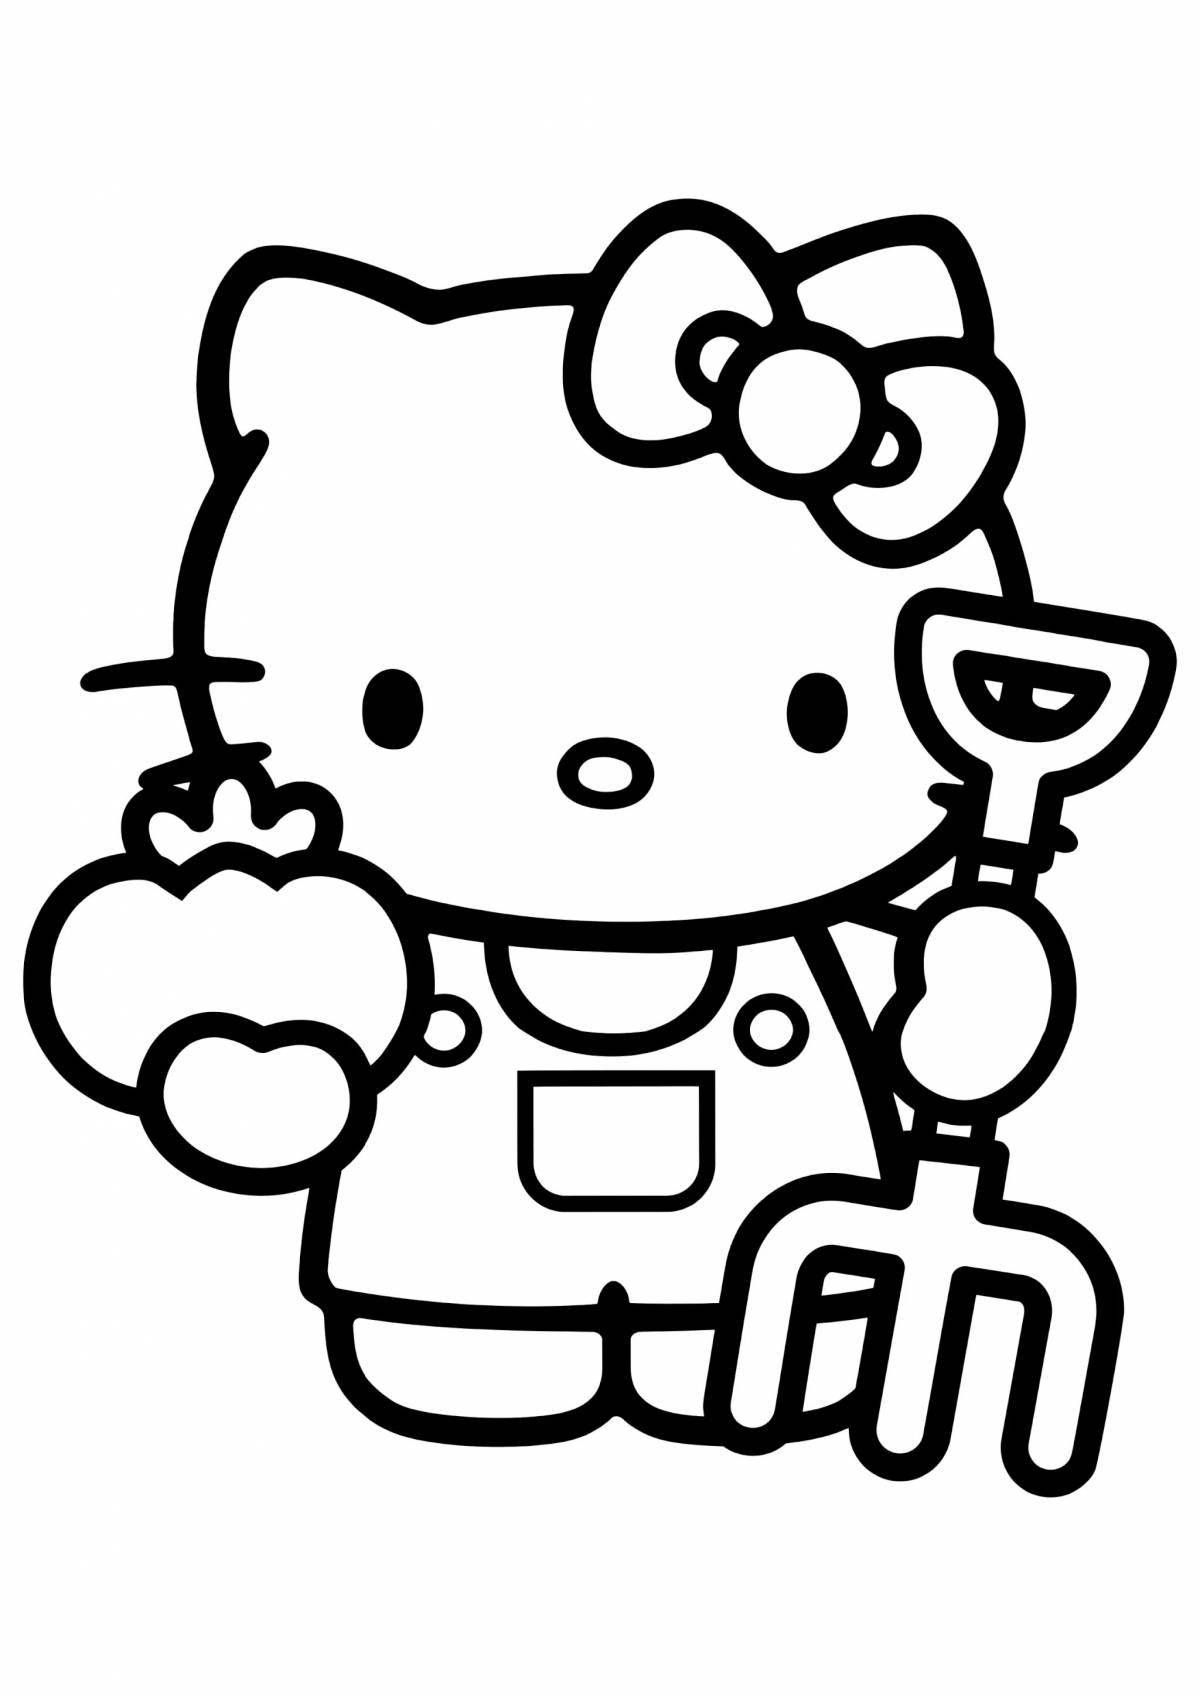 Funny little hello kitty kuromi coloring page